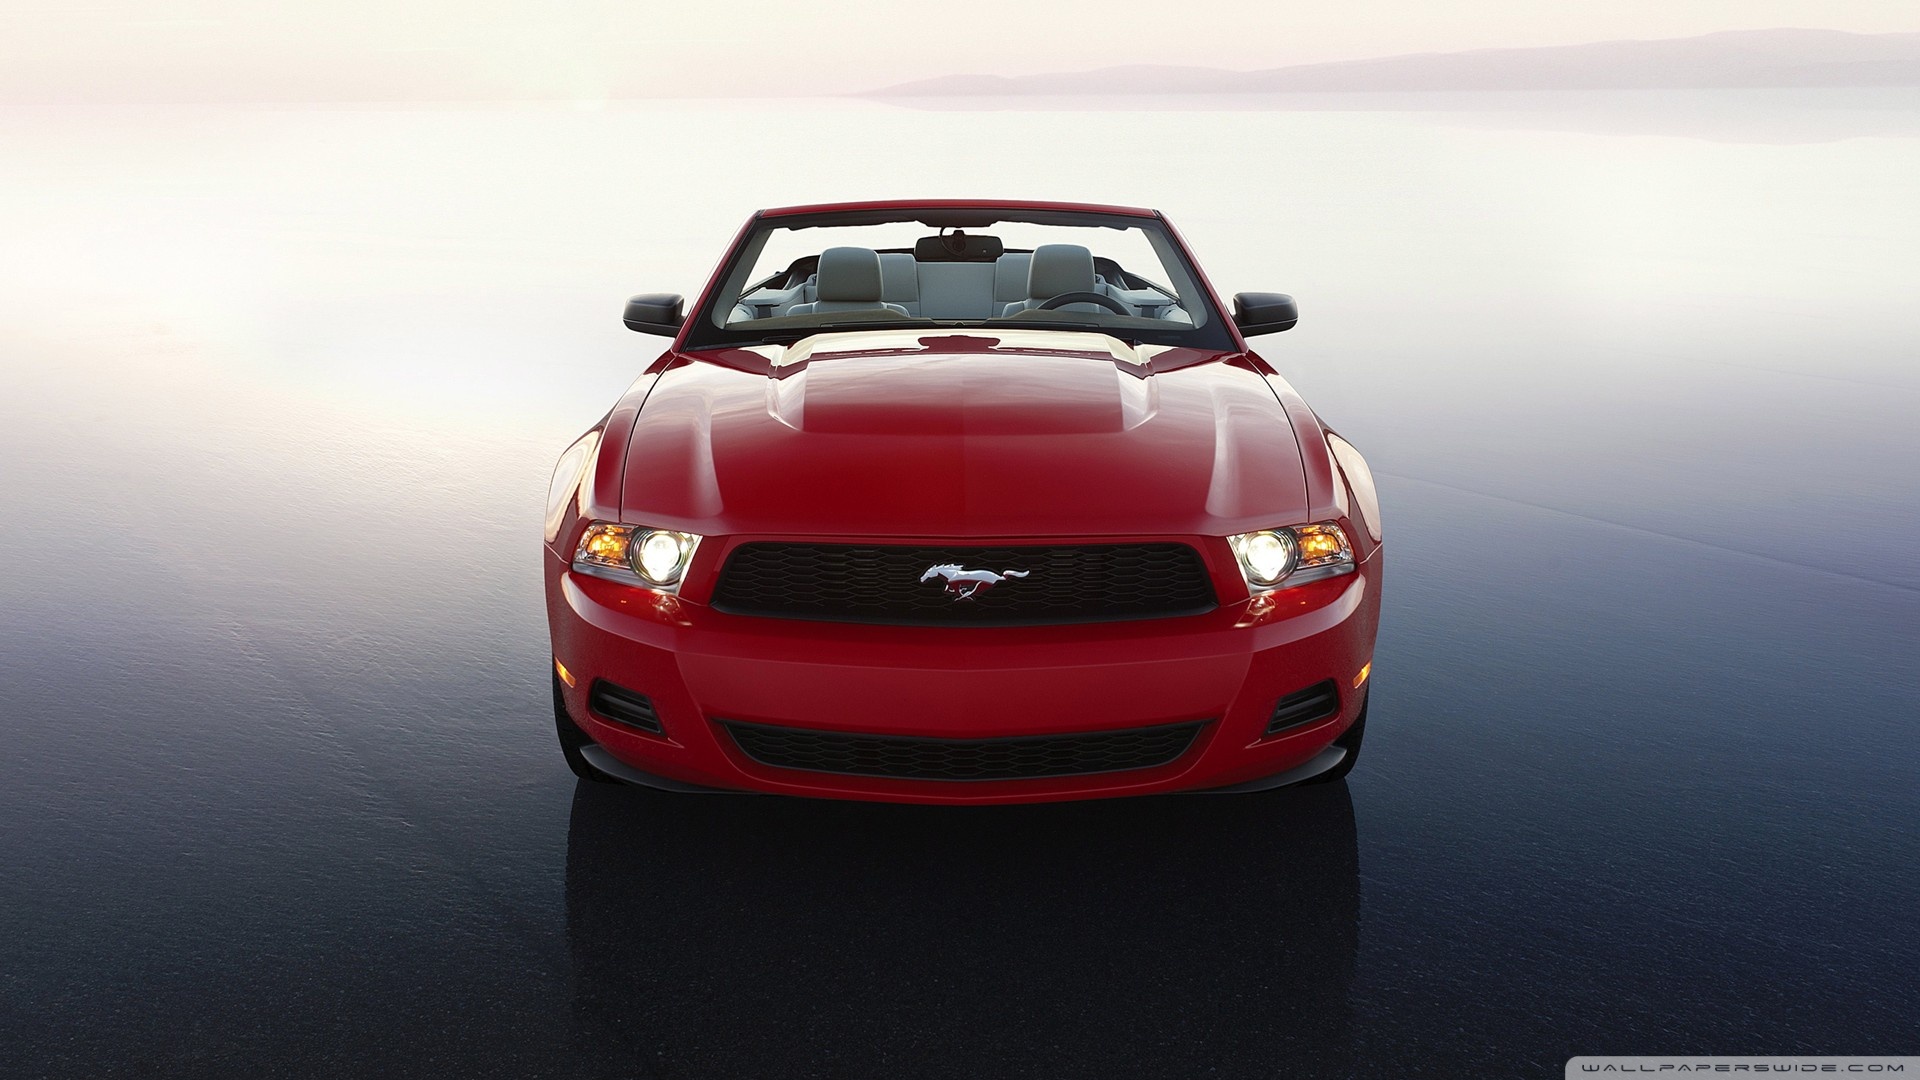 Red Ford Mustang Wallpaper - Hd Mustang 2017 Red - HD Wallpaper 